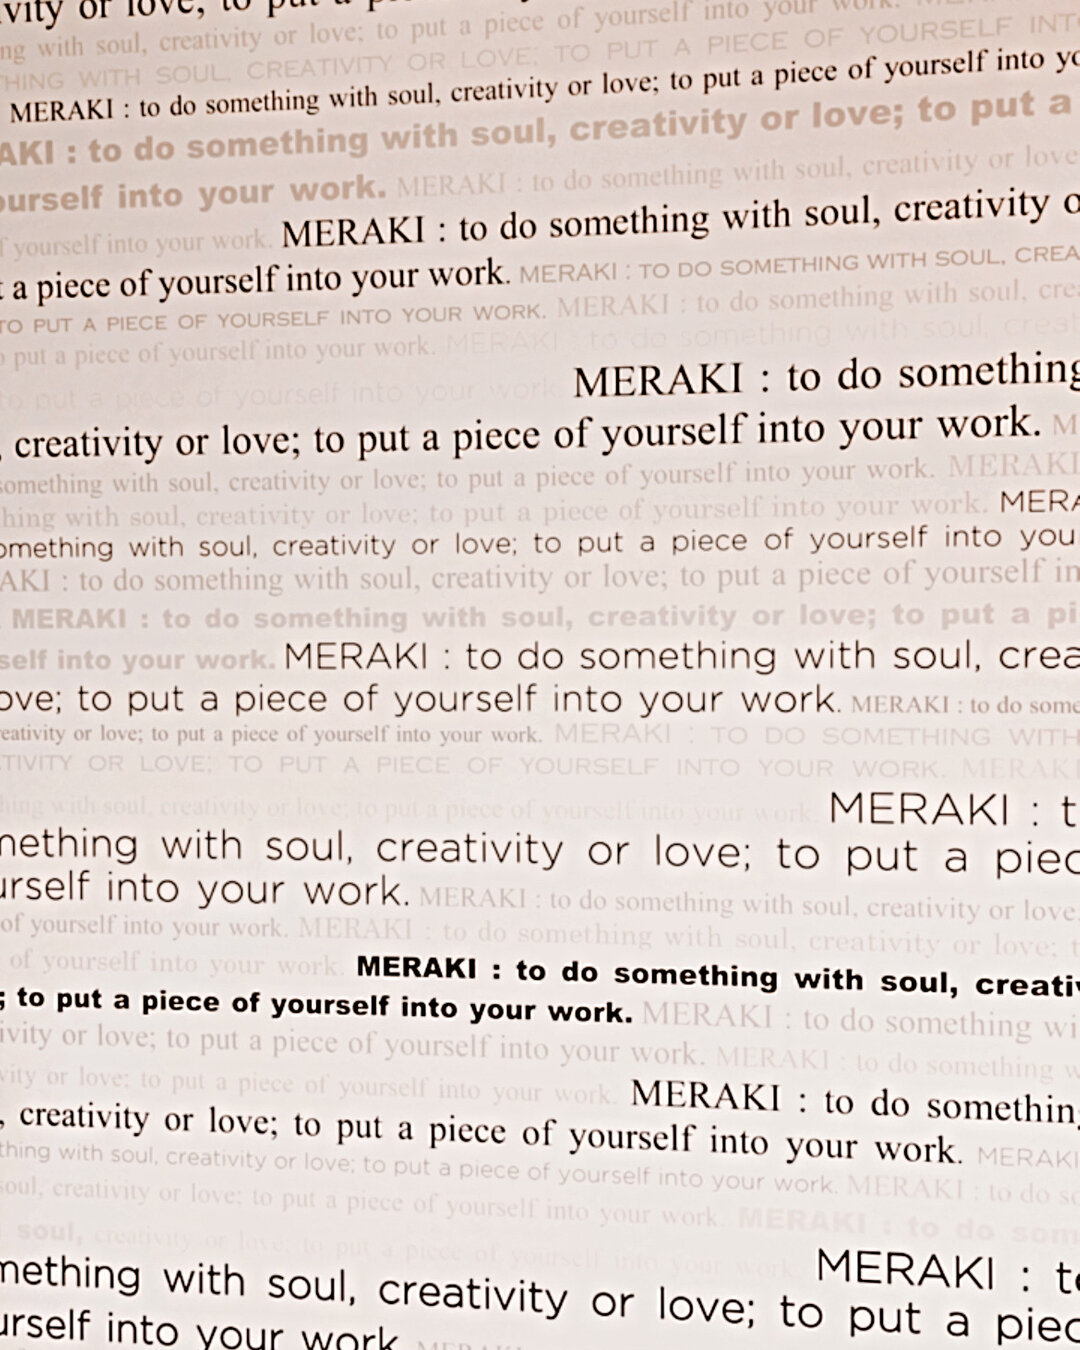 Meraki : to do something with soul, creativity, or love; to put a piece of yourself into your work. ​​​​​​​​
It is our name. It is our mission statement. ​​​​​​​​
It is who we are and what we do. ​​​​​​​​
🖤 ​​​​​​​​
#Meraki #Merakihairandbody #balan